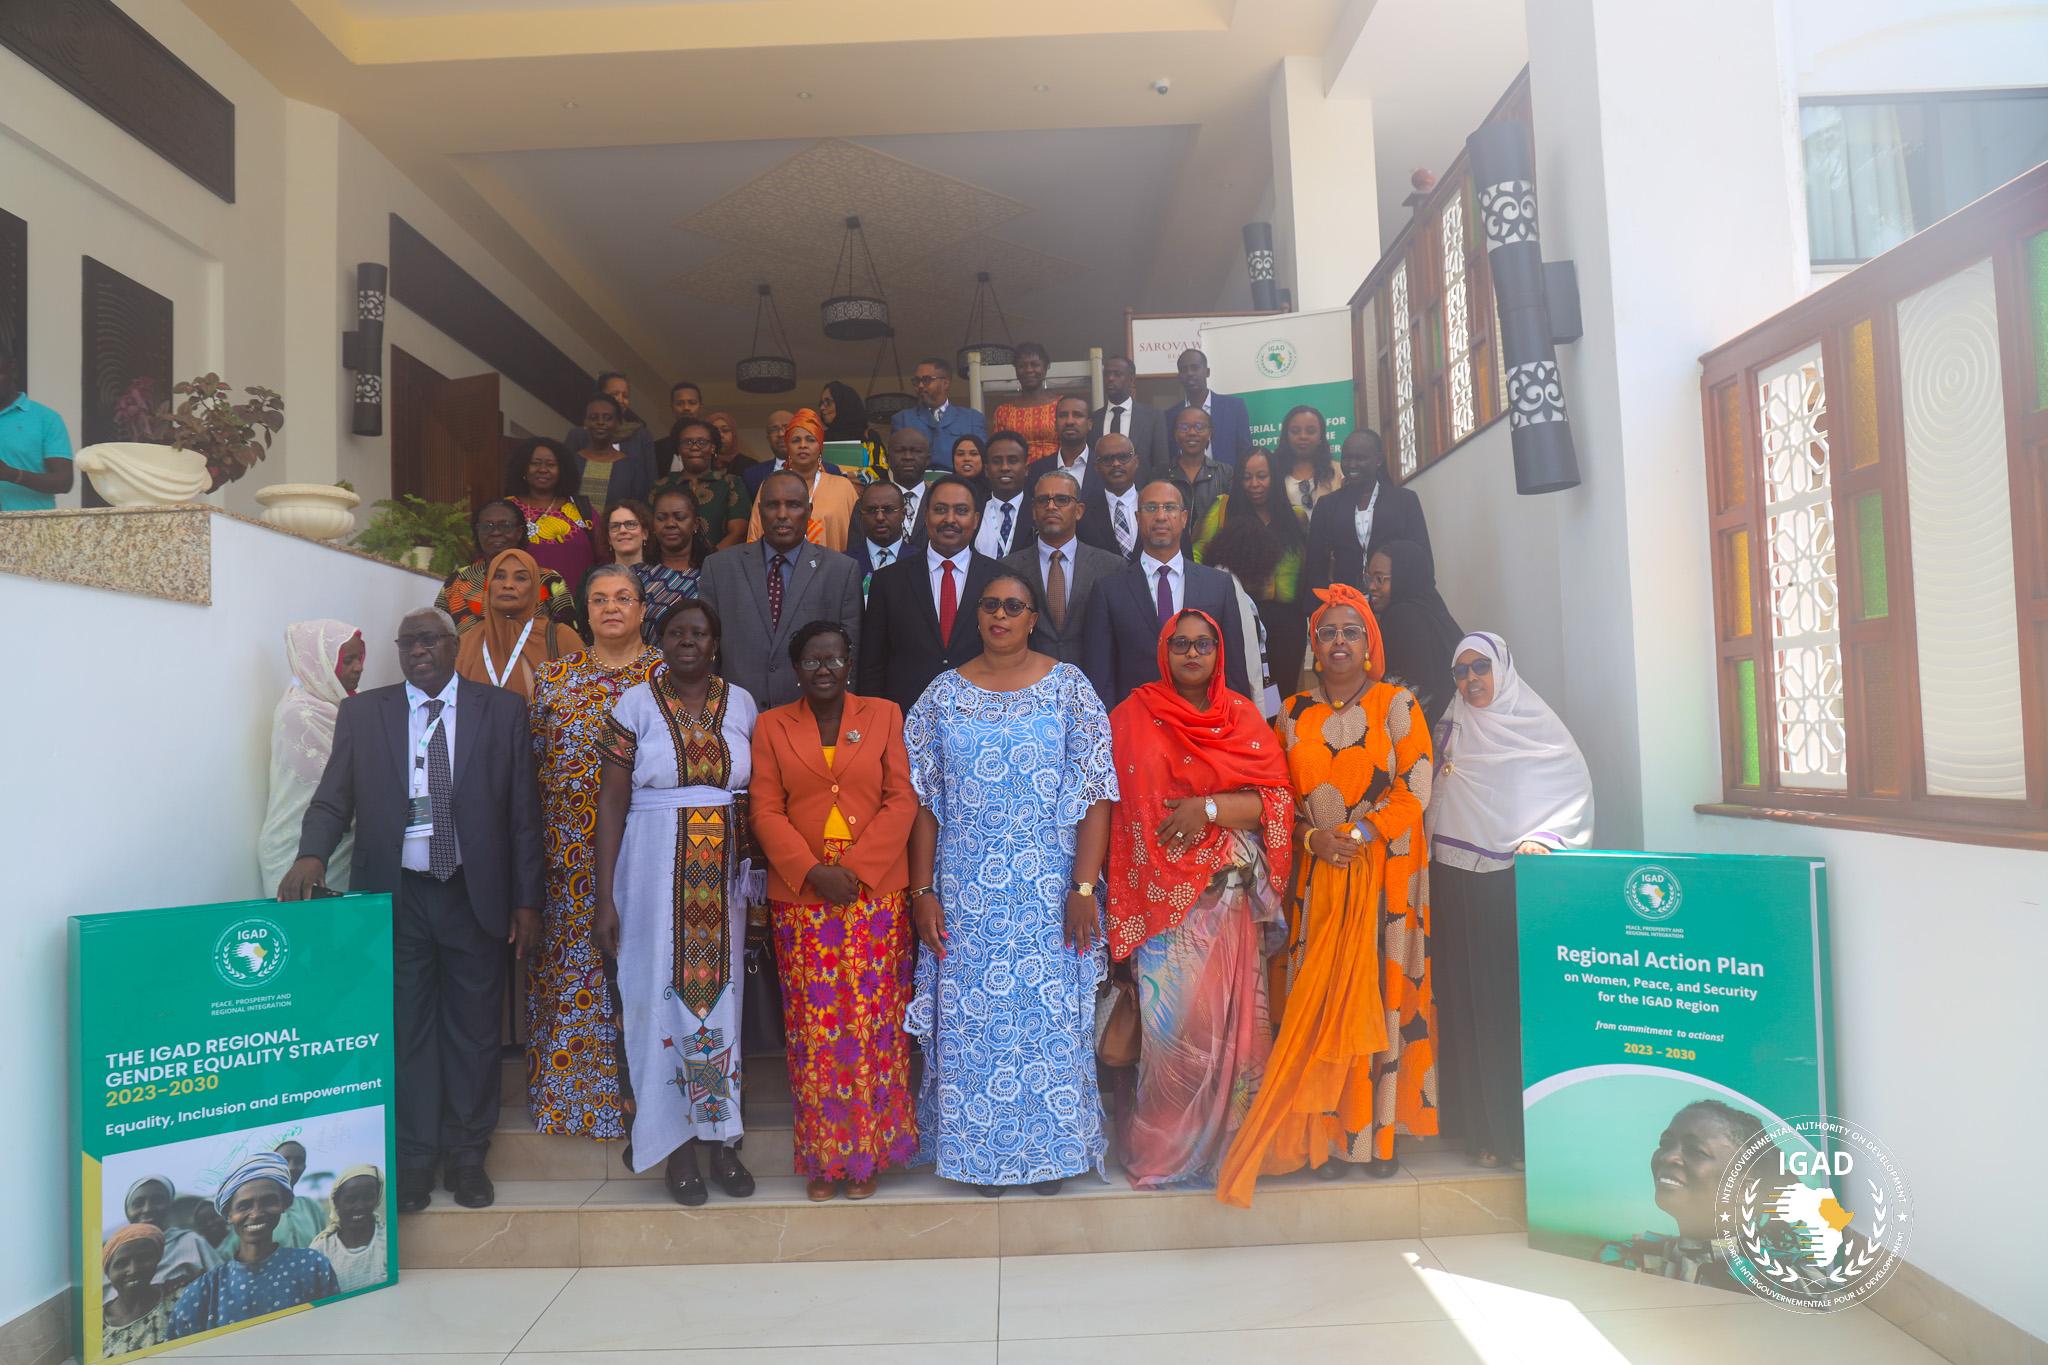 IGAD organises a Ministerial Meeting for the Adoption of the IGAD Regional Gender Strategy and IGAD Regional Action Plan on Women, Peace and Security.